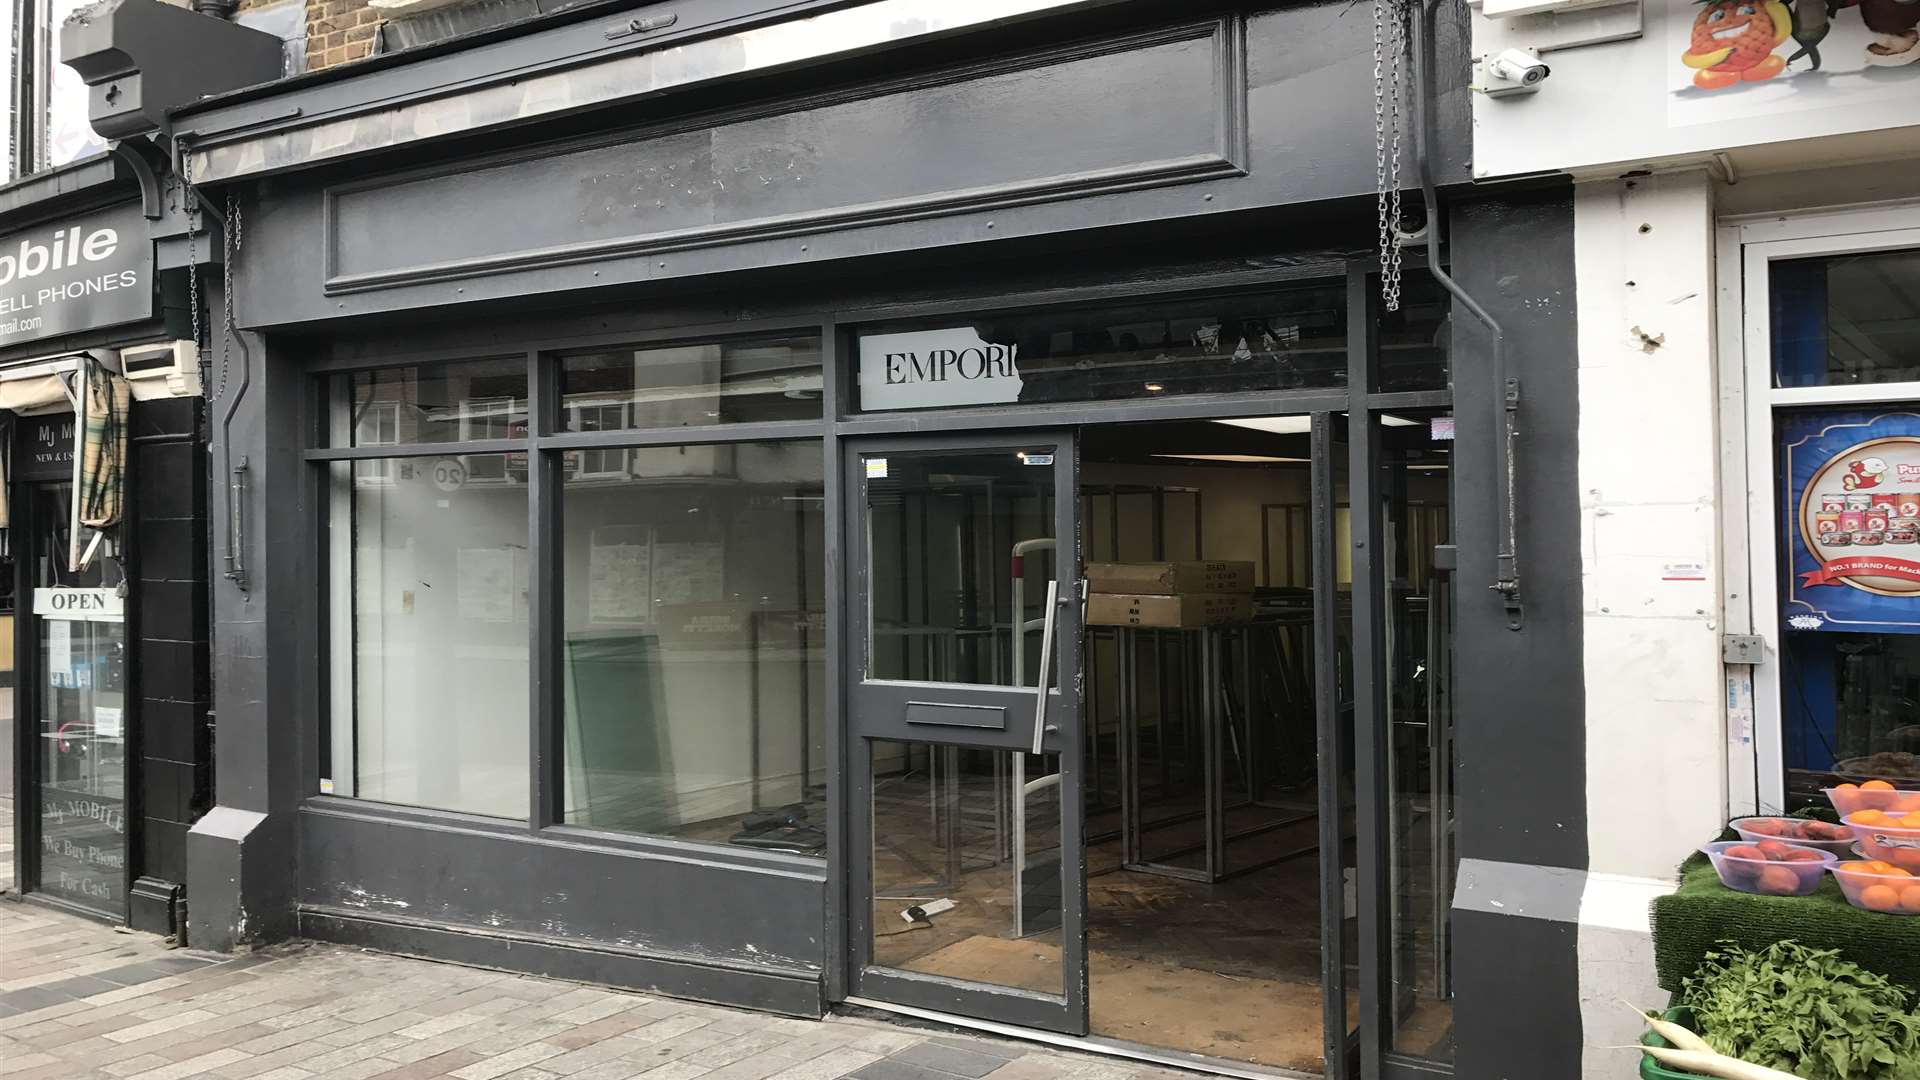 Zee & Co in Maidstone High Street has closed down